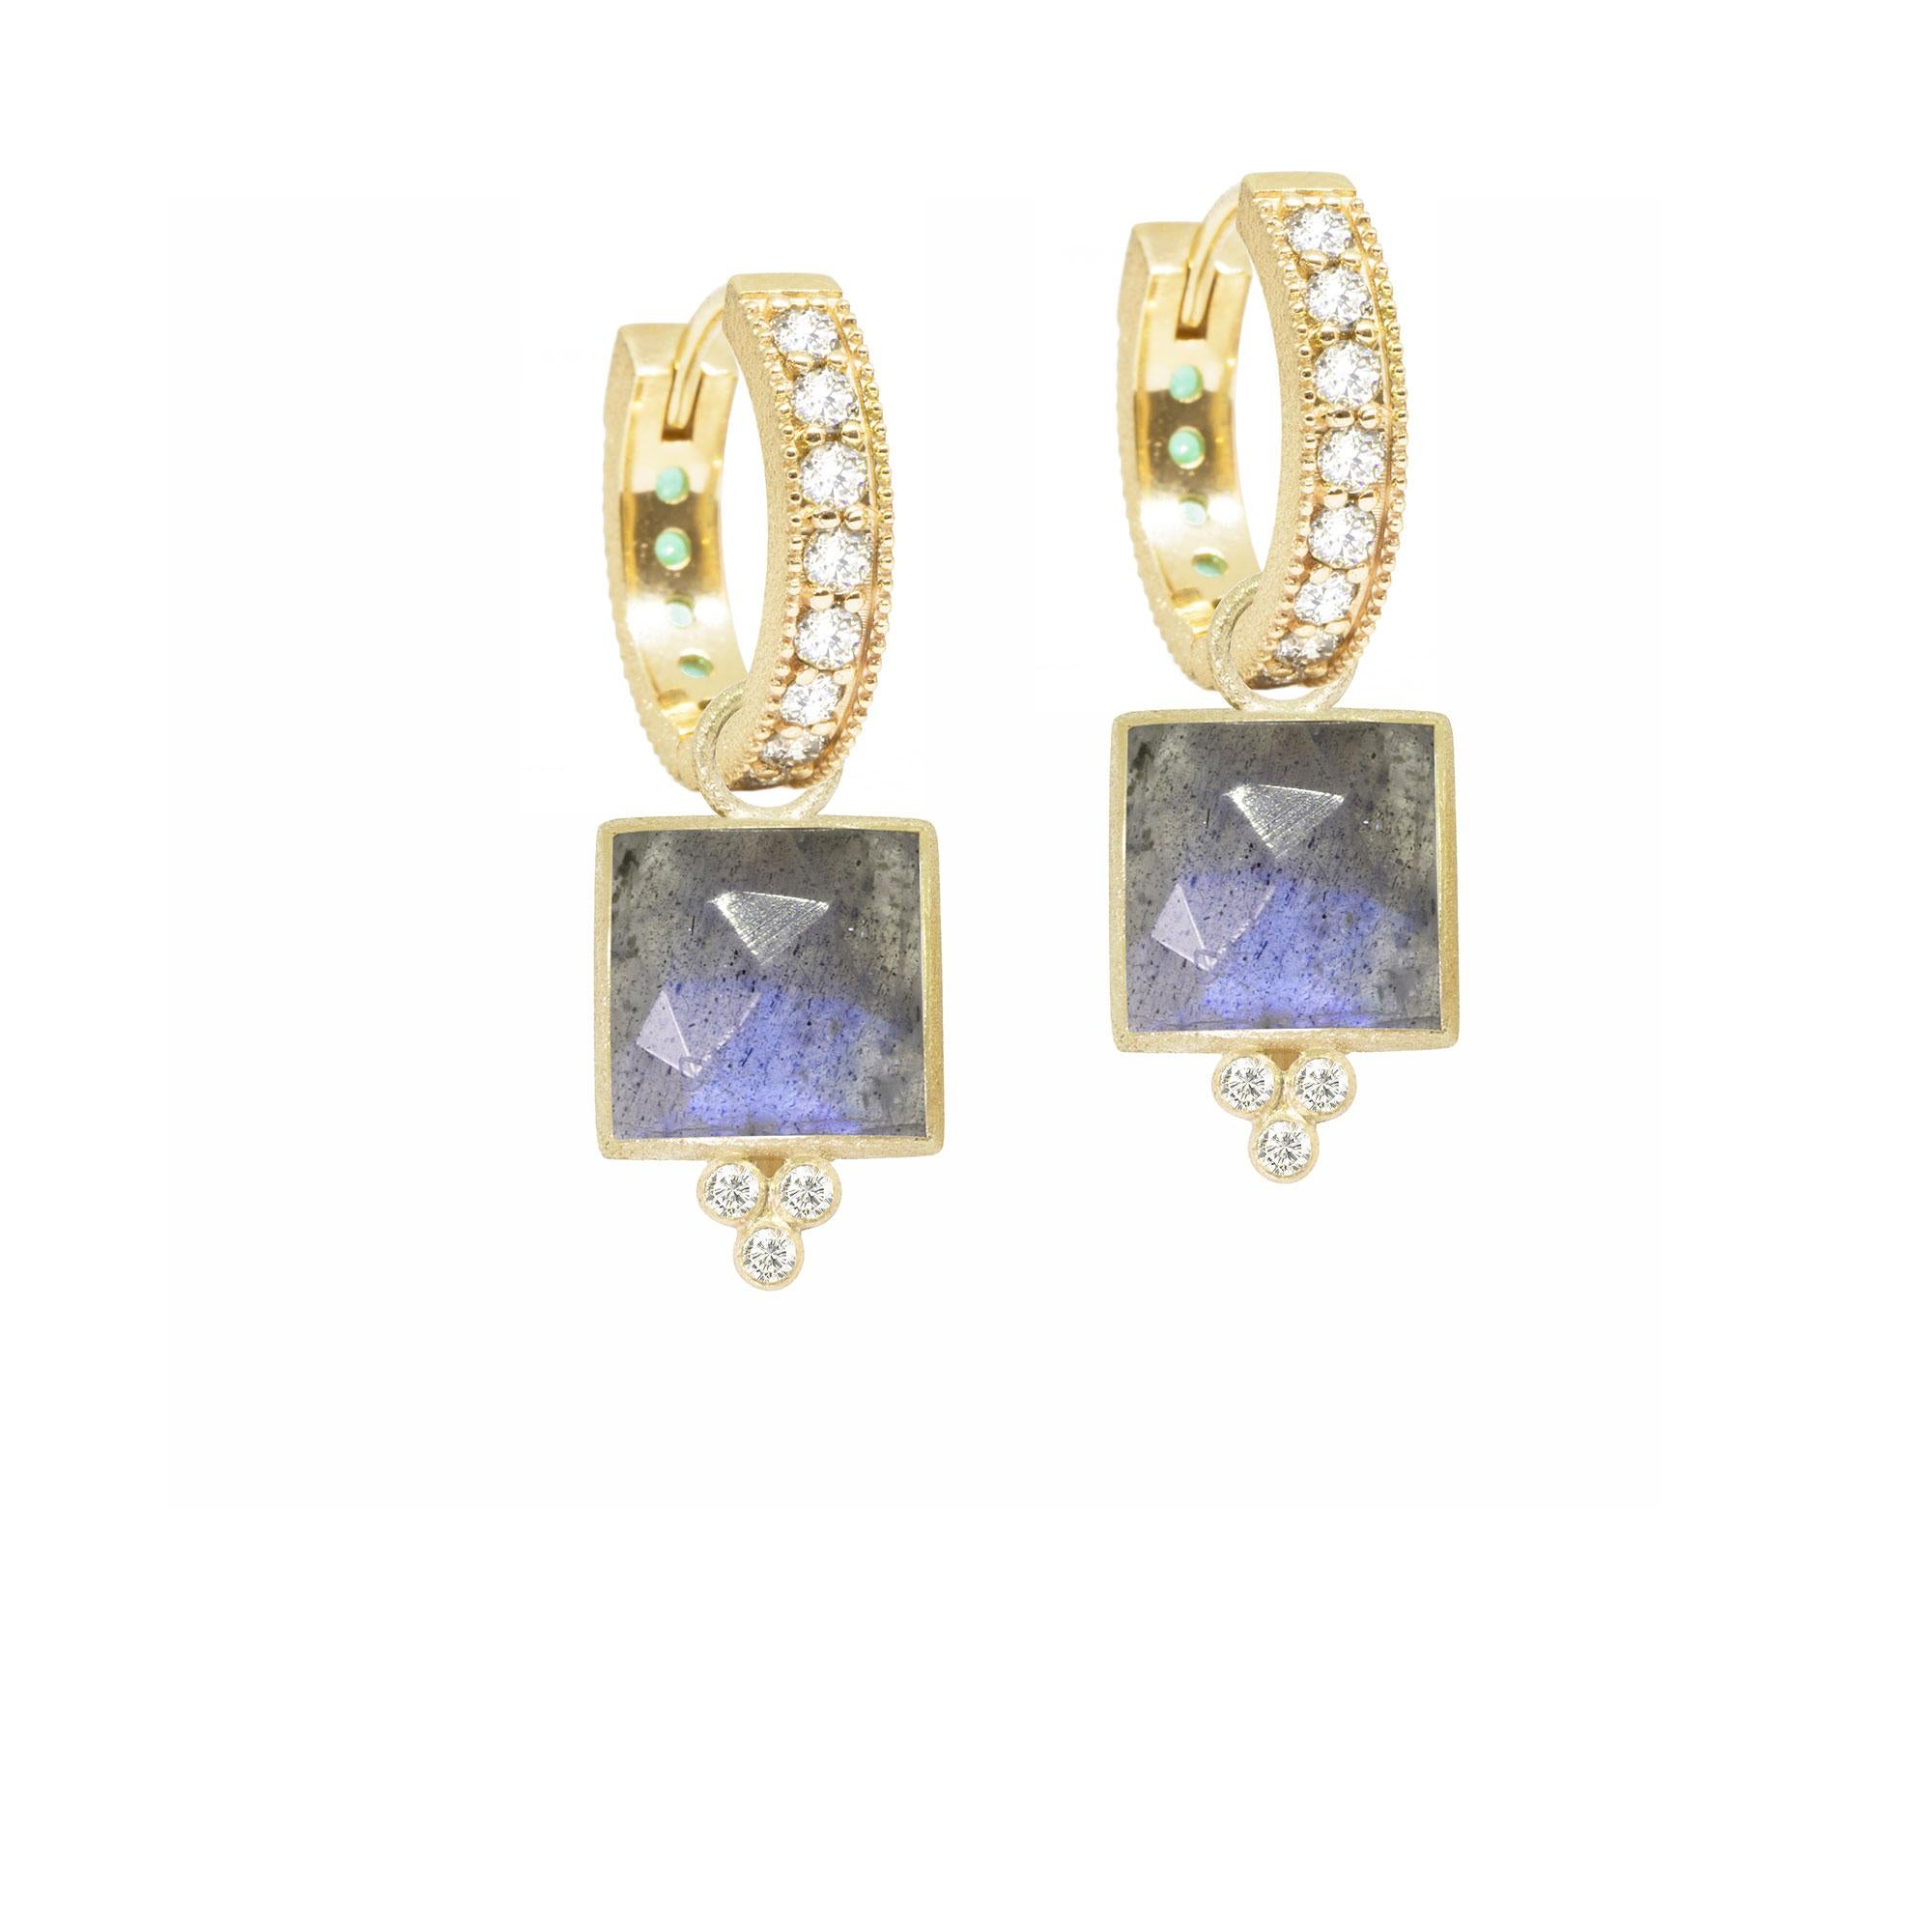 Square dance: Designed with hand-faceted labradorite framed in a textured gold bezel, our Ariana Gold Ring is your new signature style, with diamond side stones for some extra sparkle.

Nina Nguyen Design's patent-pending earrings have an element on